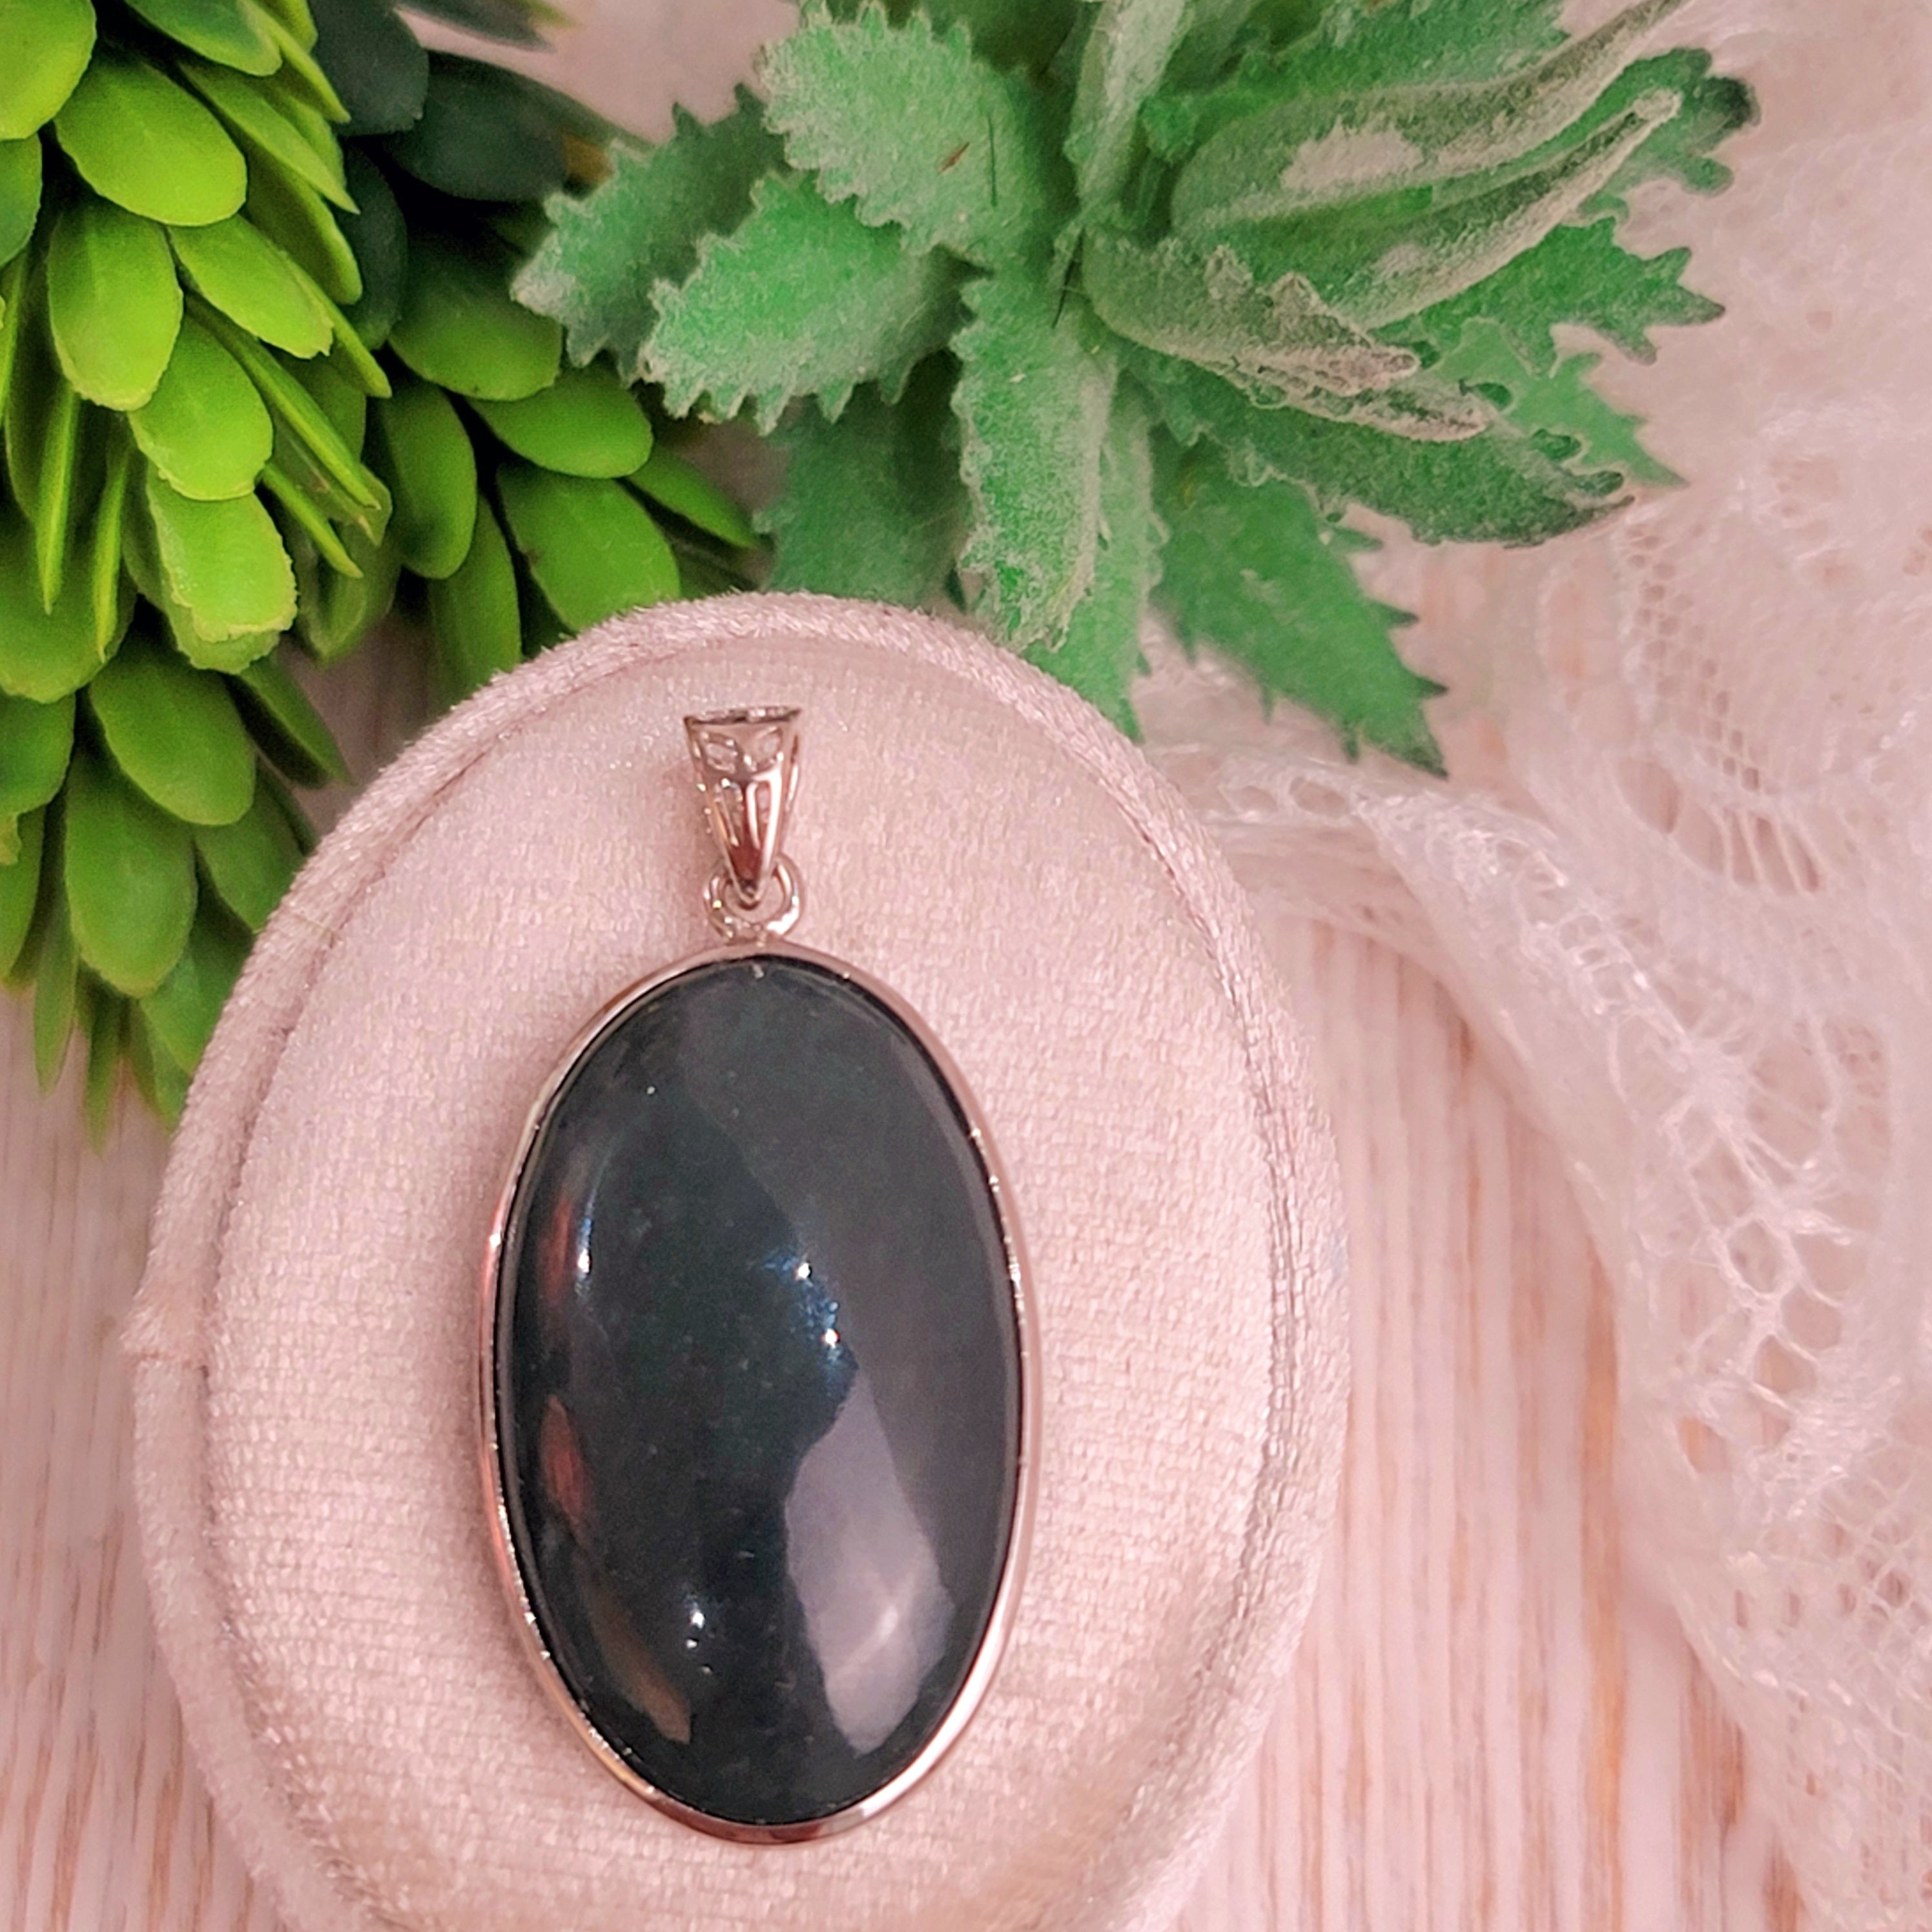 Guatemalean Jadeite Pendant for Protection and Luck